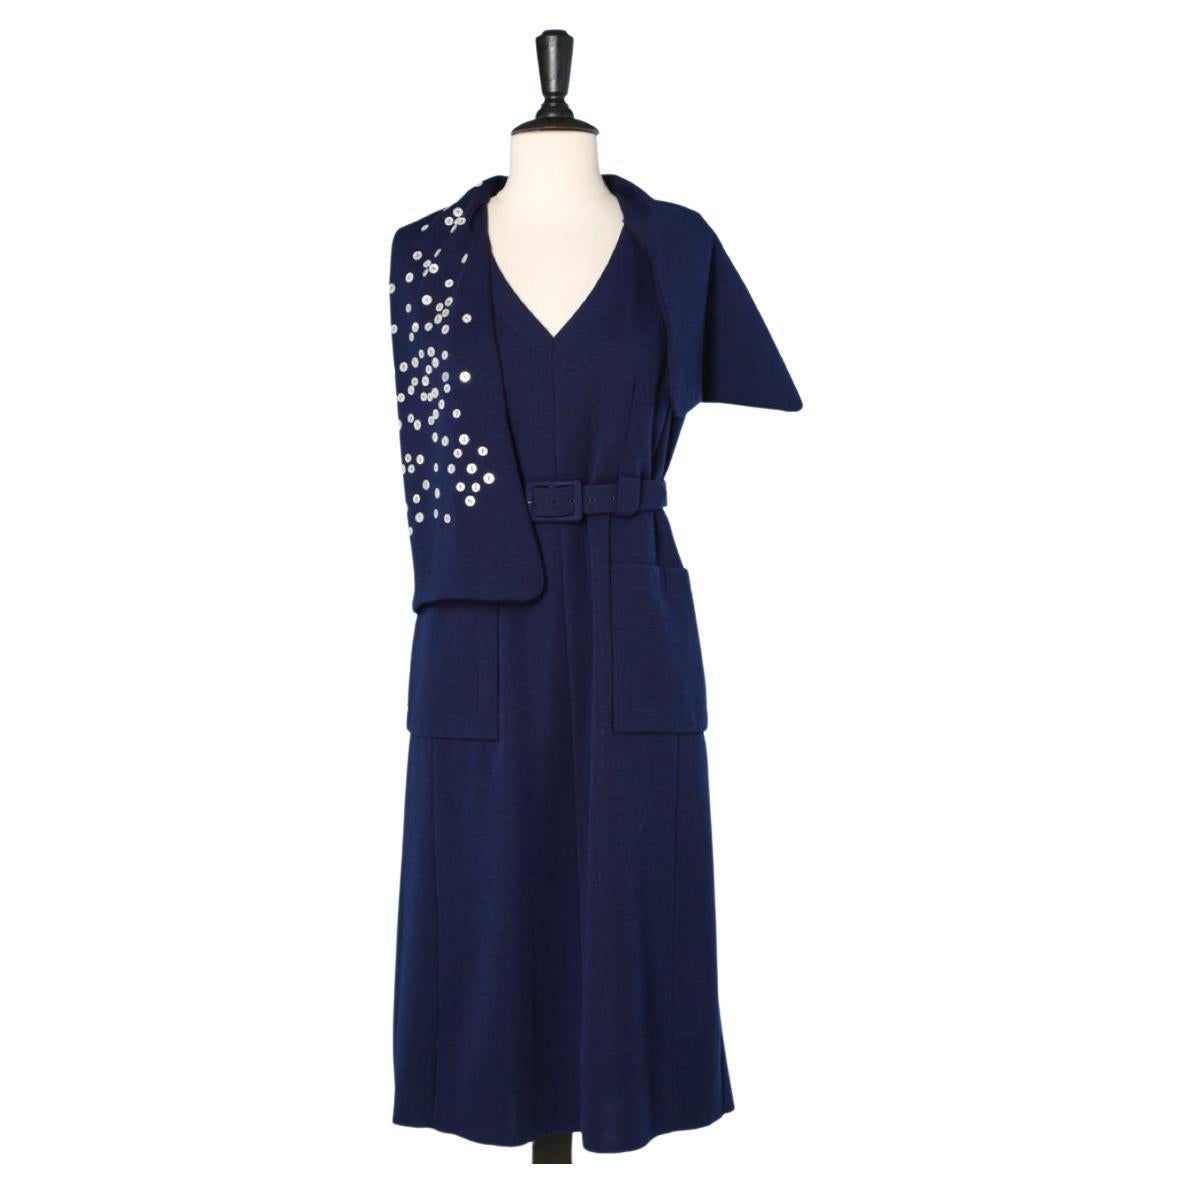 Navy blue wool jersey dress with detachable scarf-collar Pauline Trigère 69 For Sale